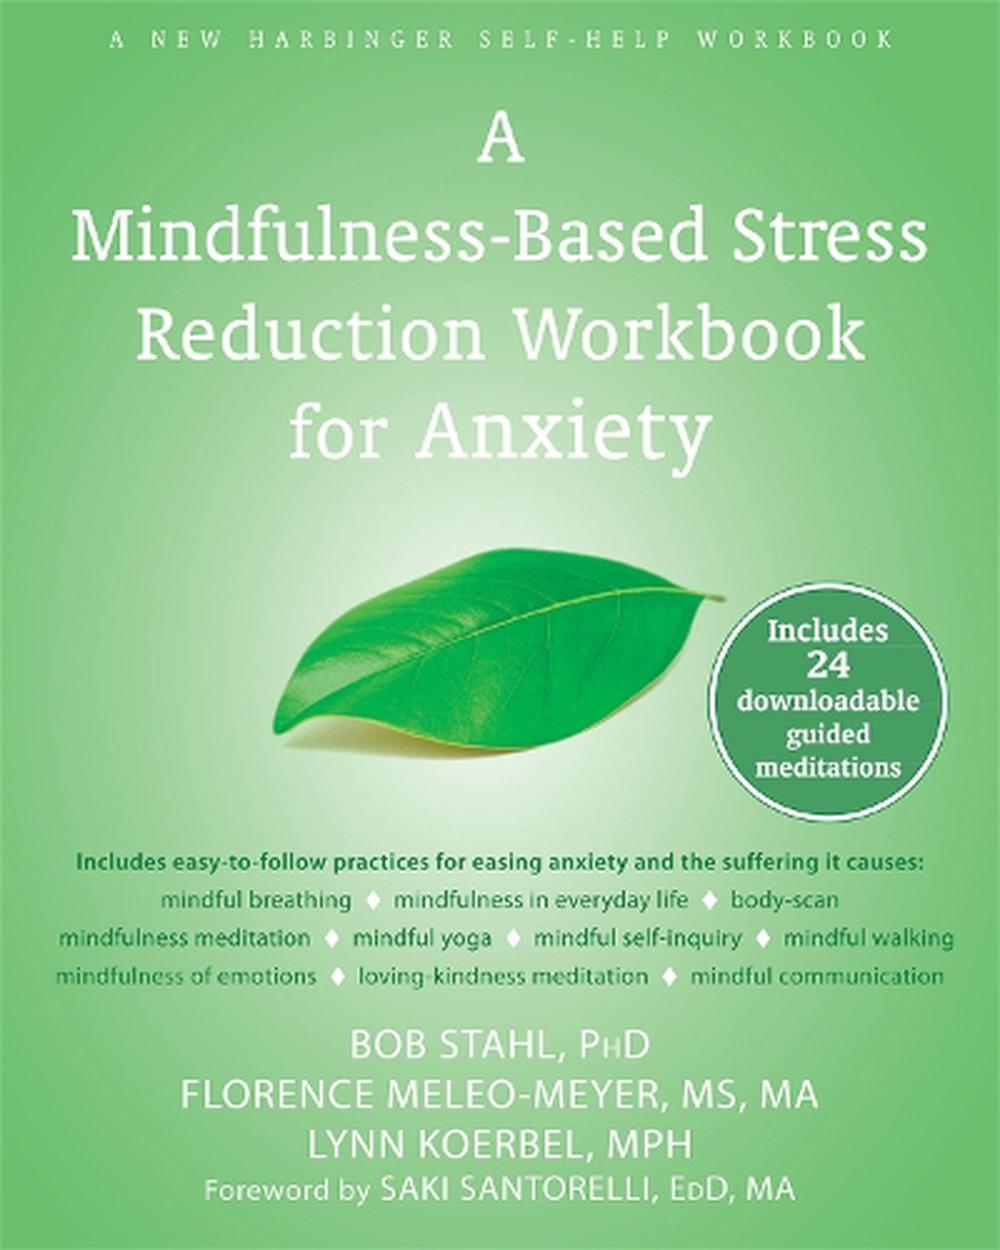 Mindfulness-Based Stress Reduction Workbook for Anxiety by Bob Stahl ...